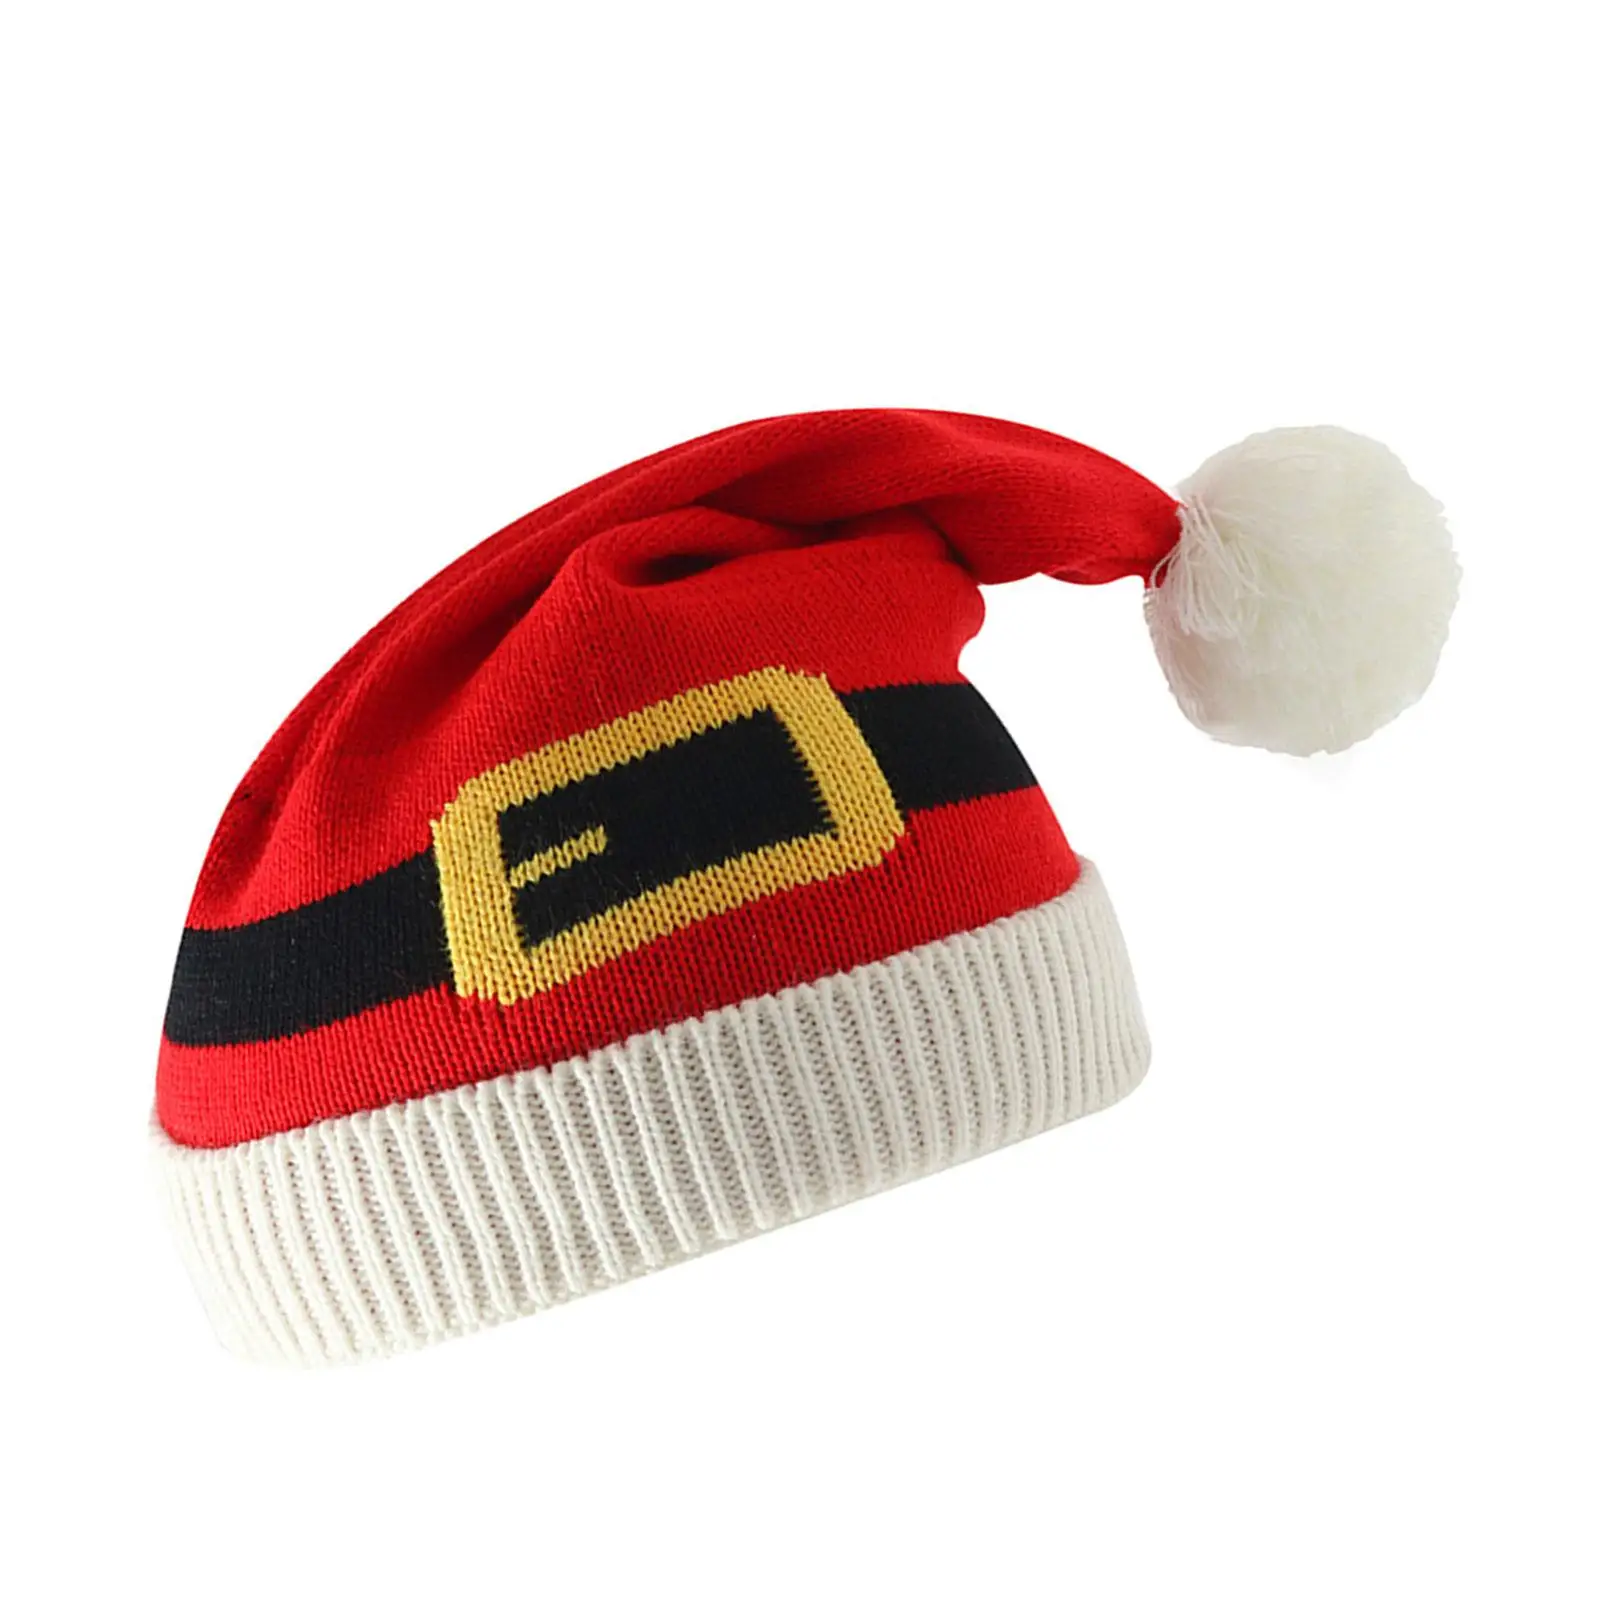 Winter Christmas Knitted Hat Knit Beanie Soft Photo Props Adults Costume Xmas Warm Hat for Carnival Festival Cosplay New Year